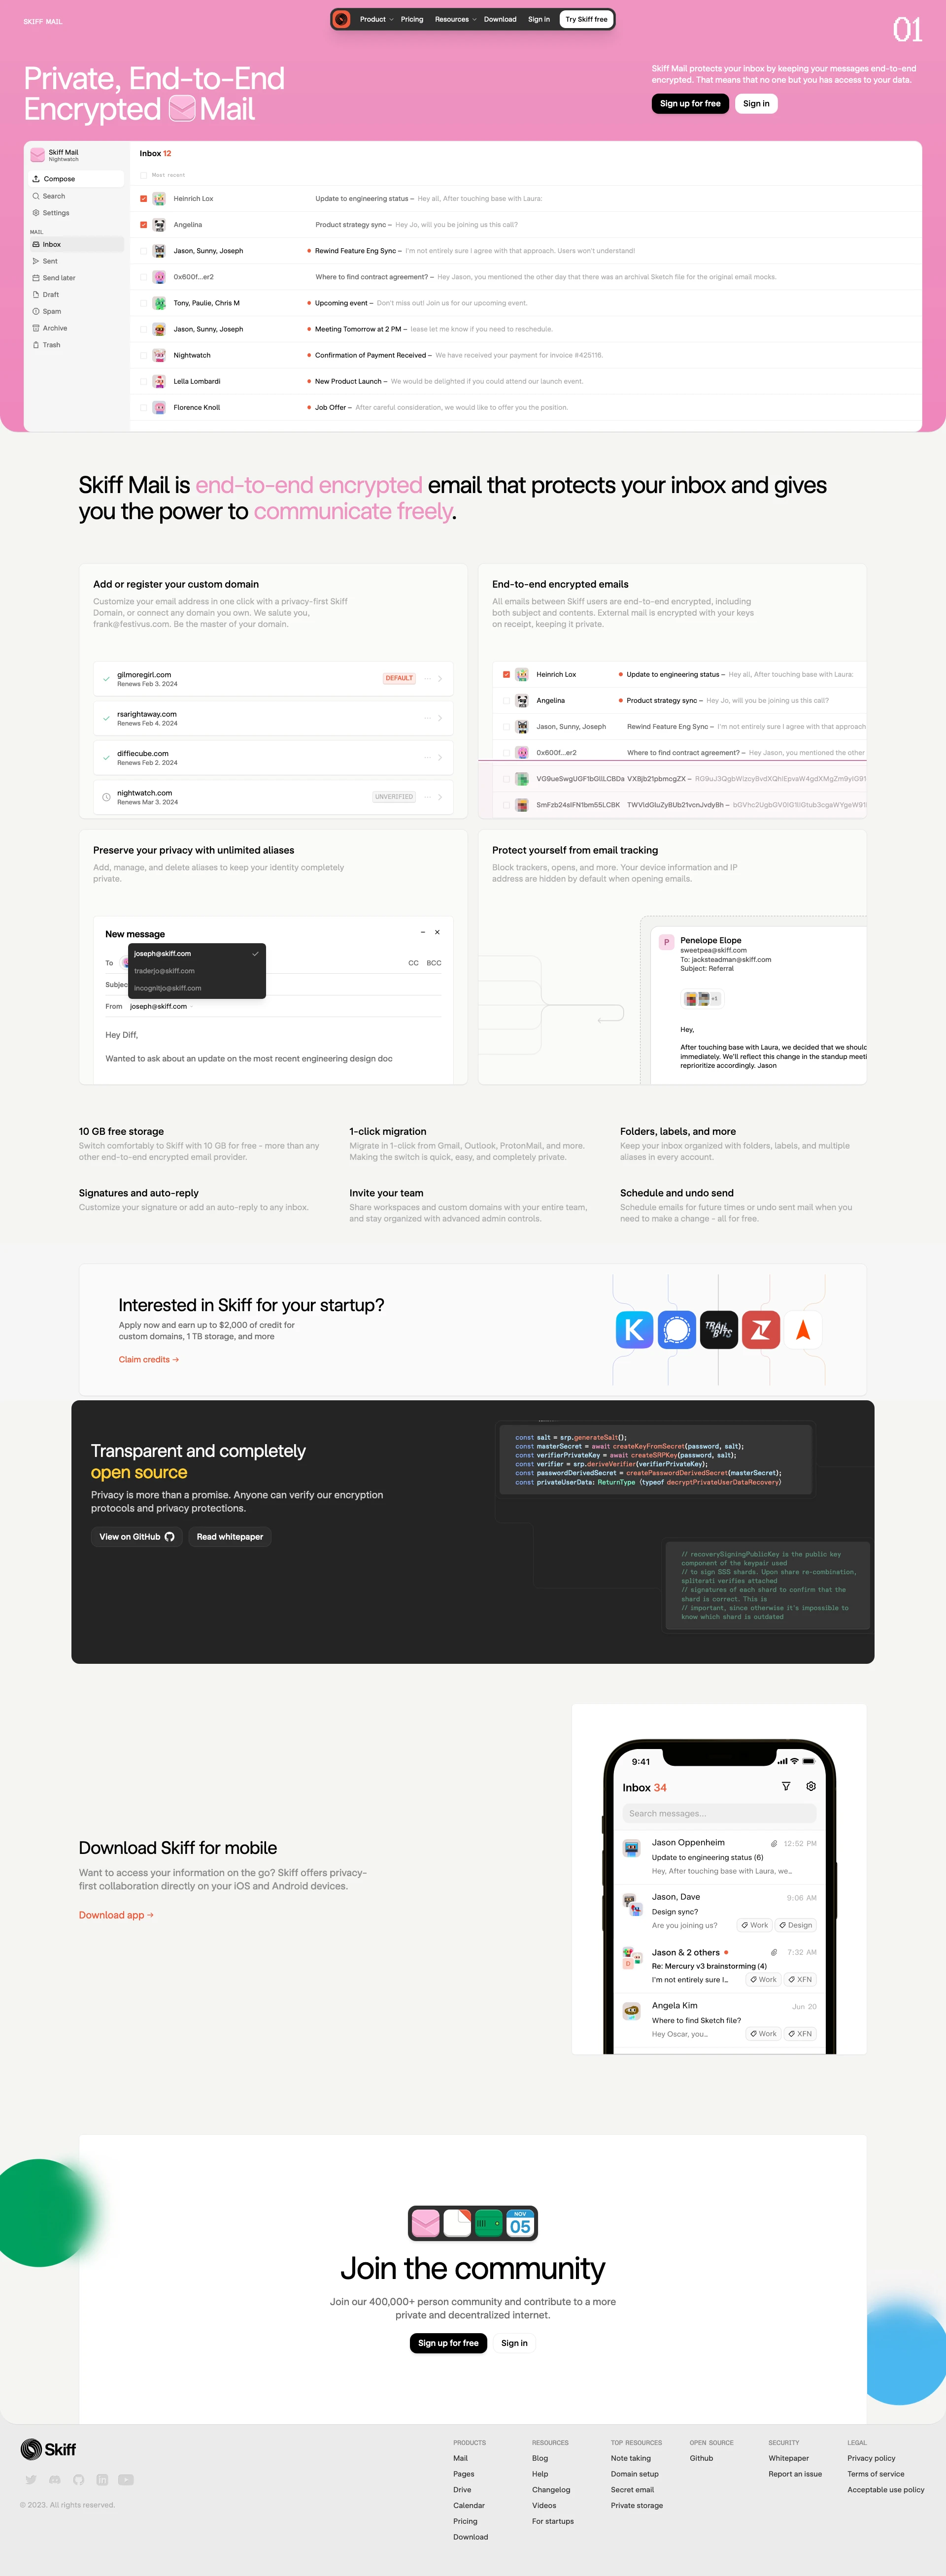 Skiff Landing Page Example: Skiff is the privacy-first workspace for free thinkers. End-to-end encrypted email, calendar, documents, and files that give you the power to communicate freely.